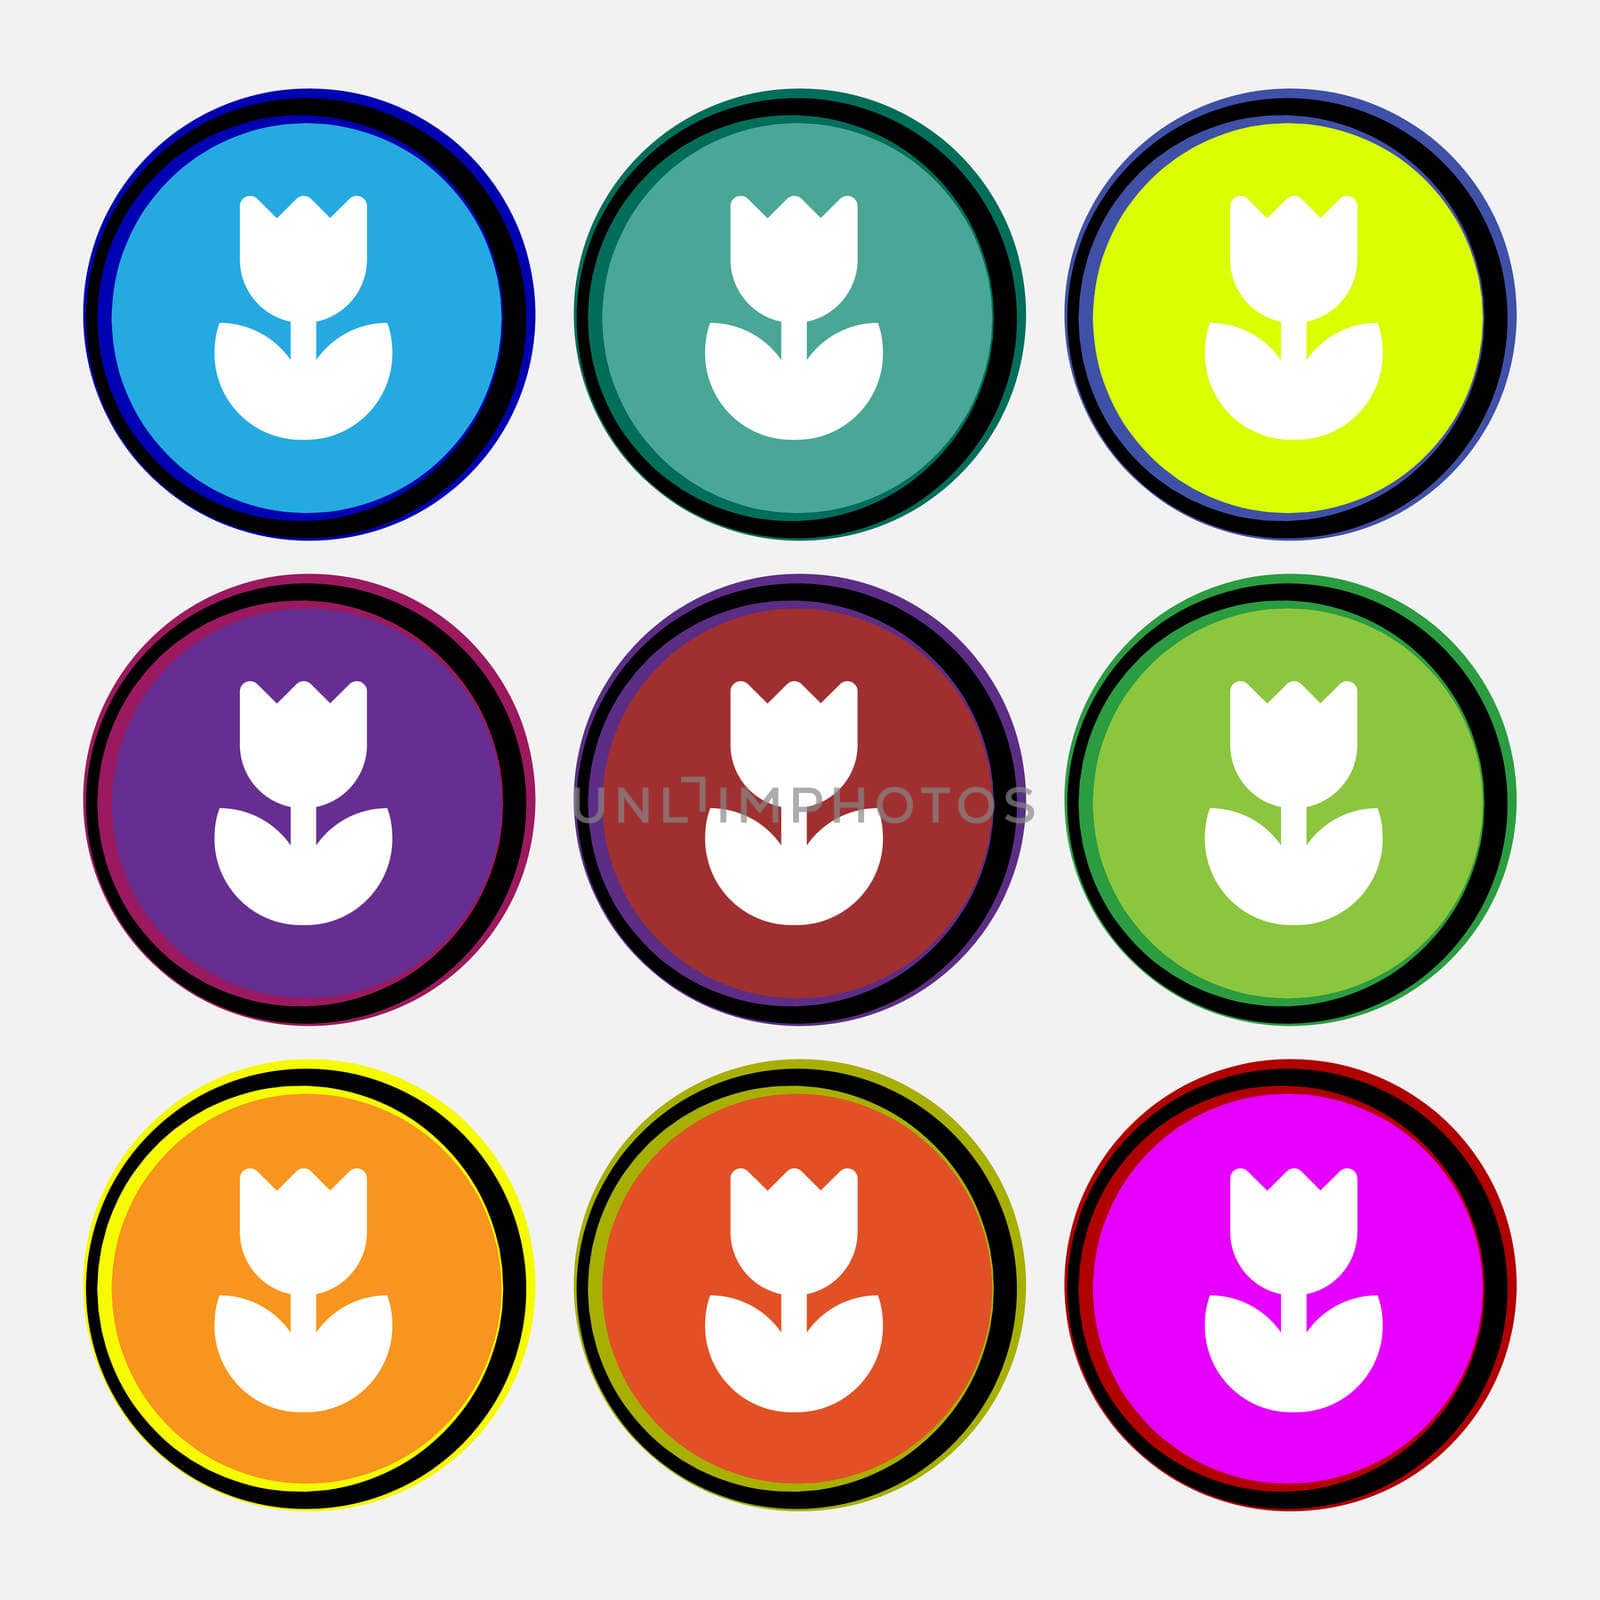 Flower, rose icon sign. Nine multi-colored round buttons. illustration